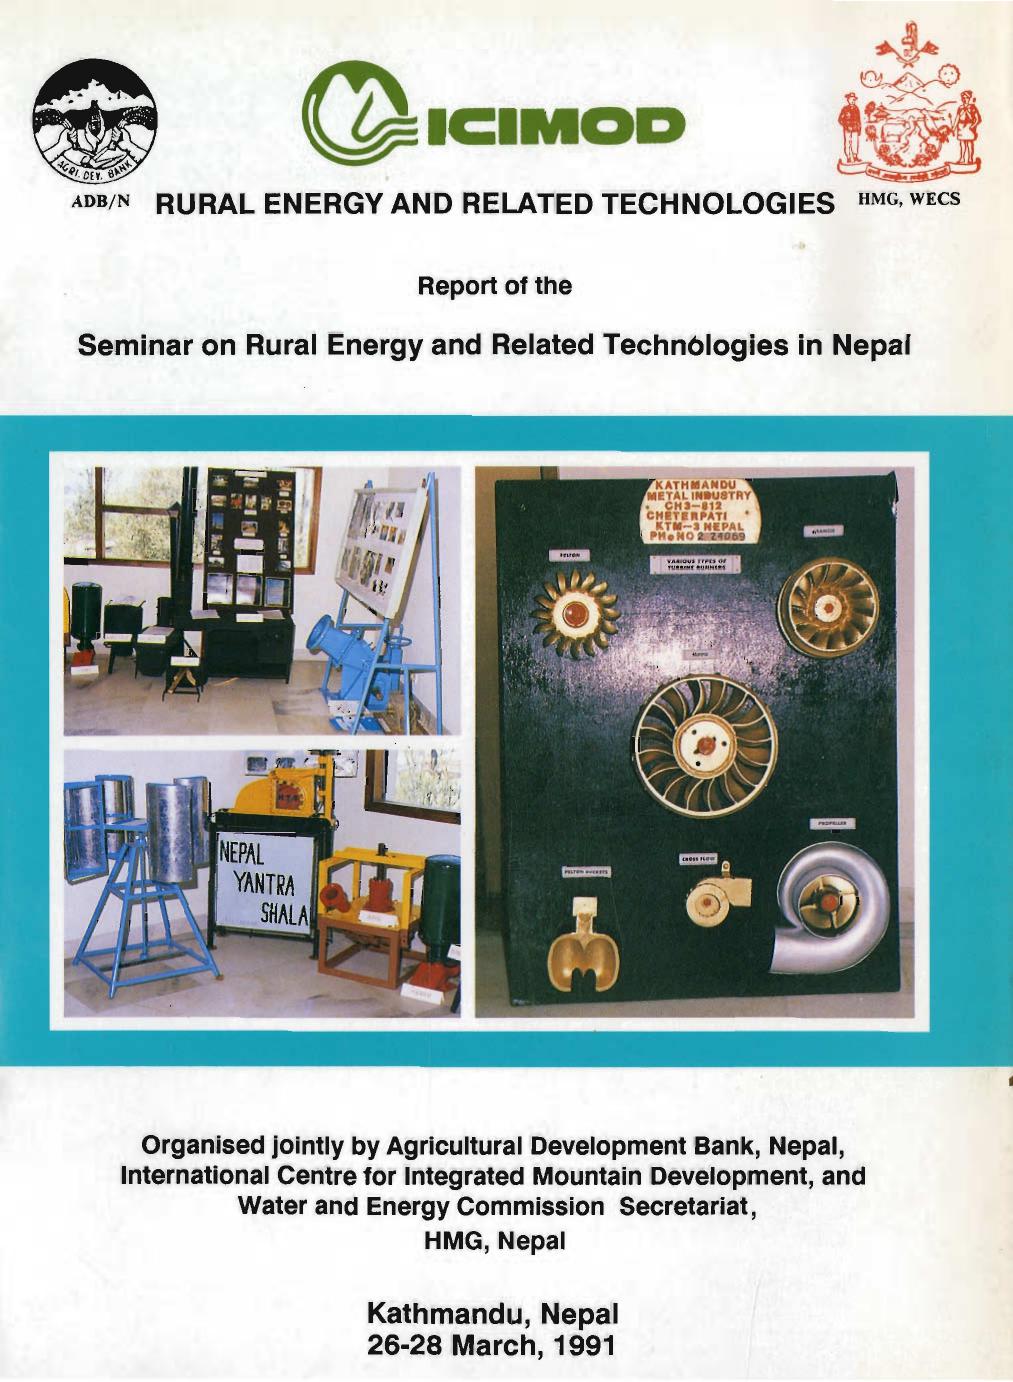 Rural Energy and Related Technologies; Report of the Seminar on Rural Energy and Related Technologies in Nepal